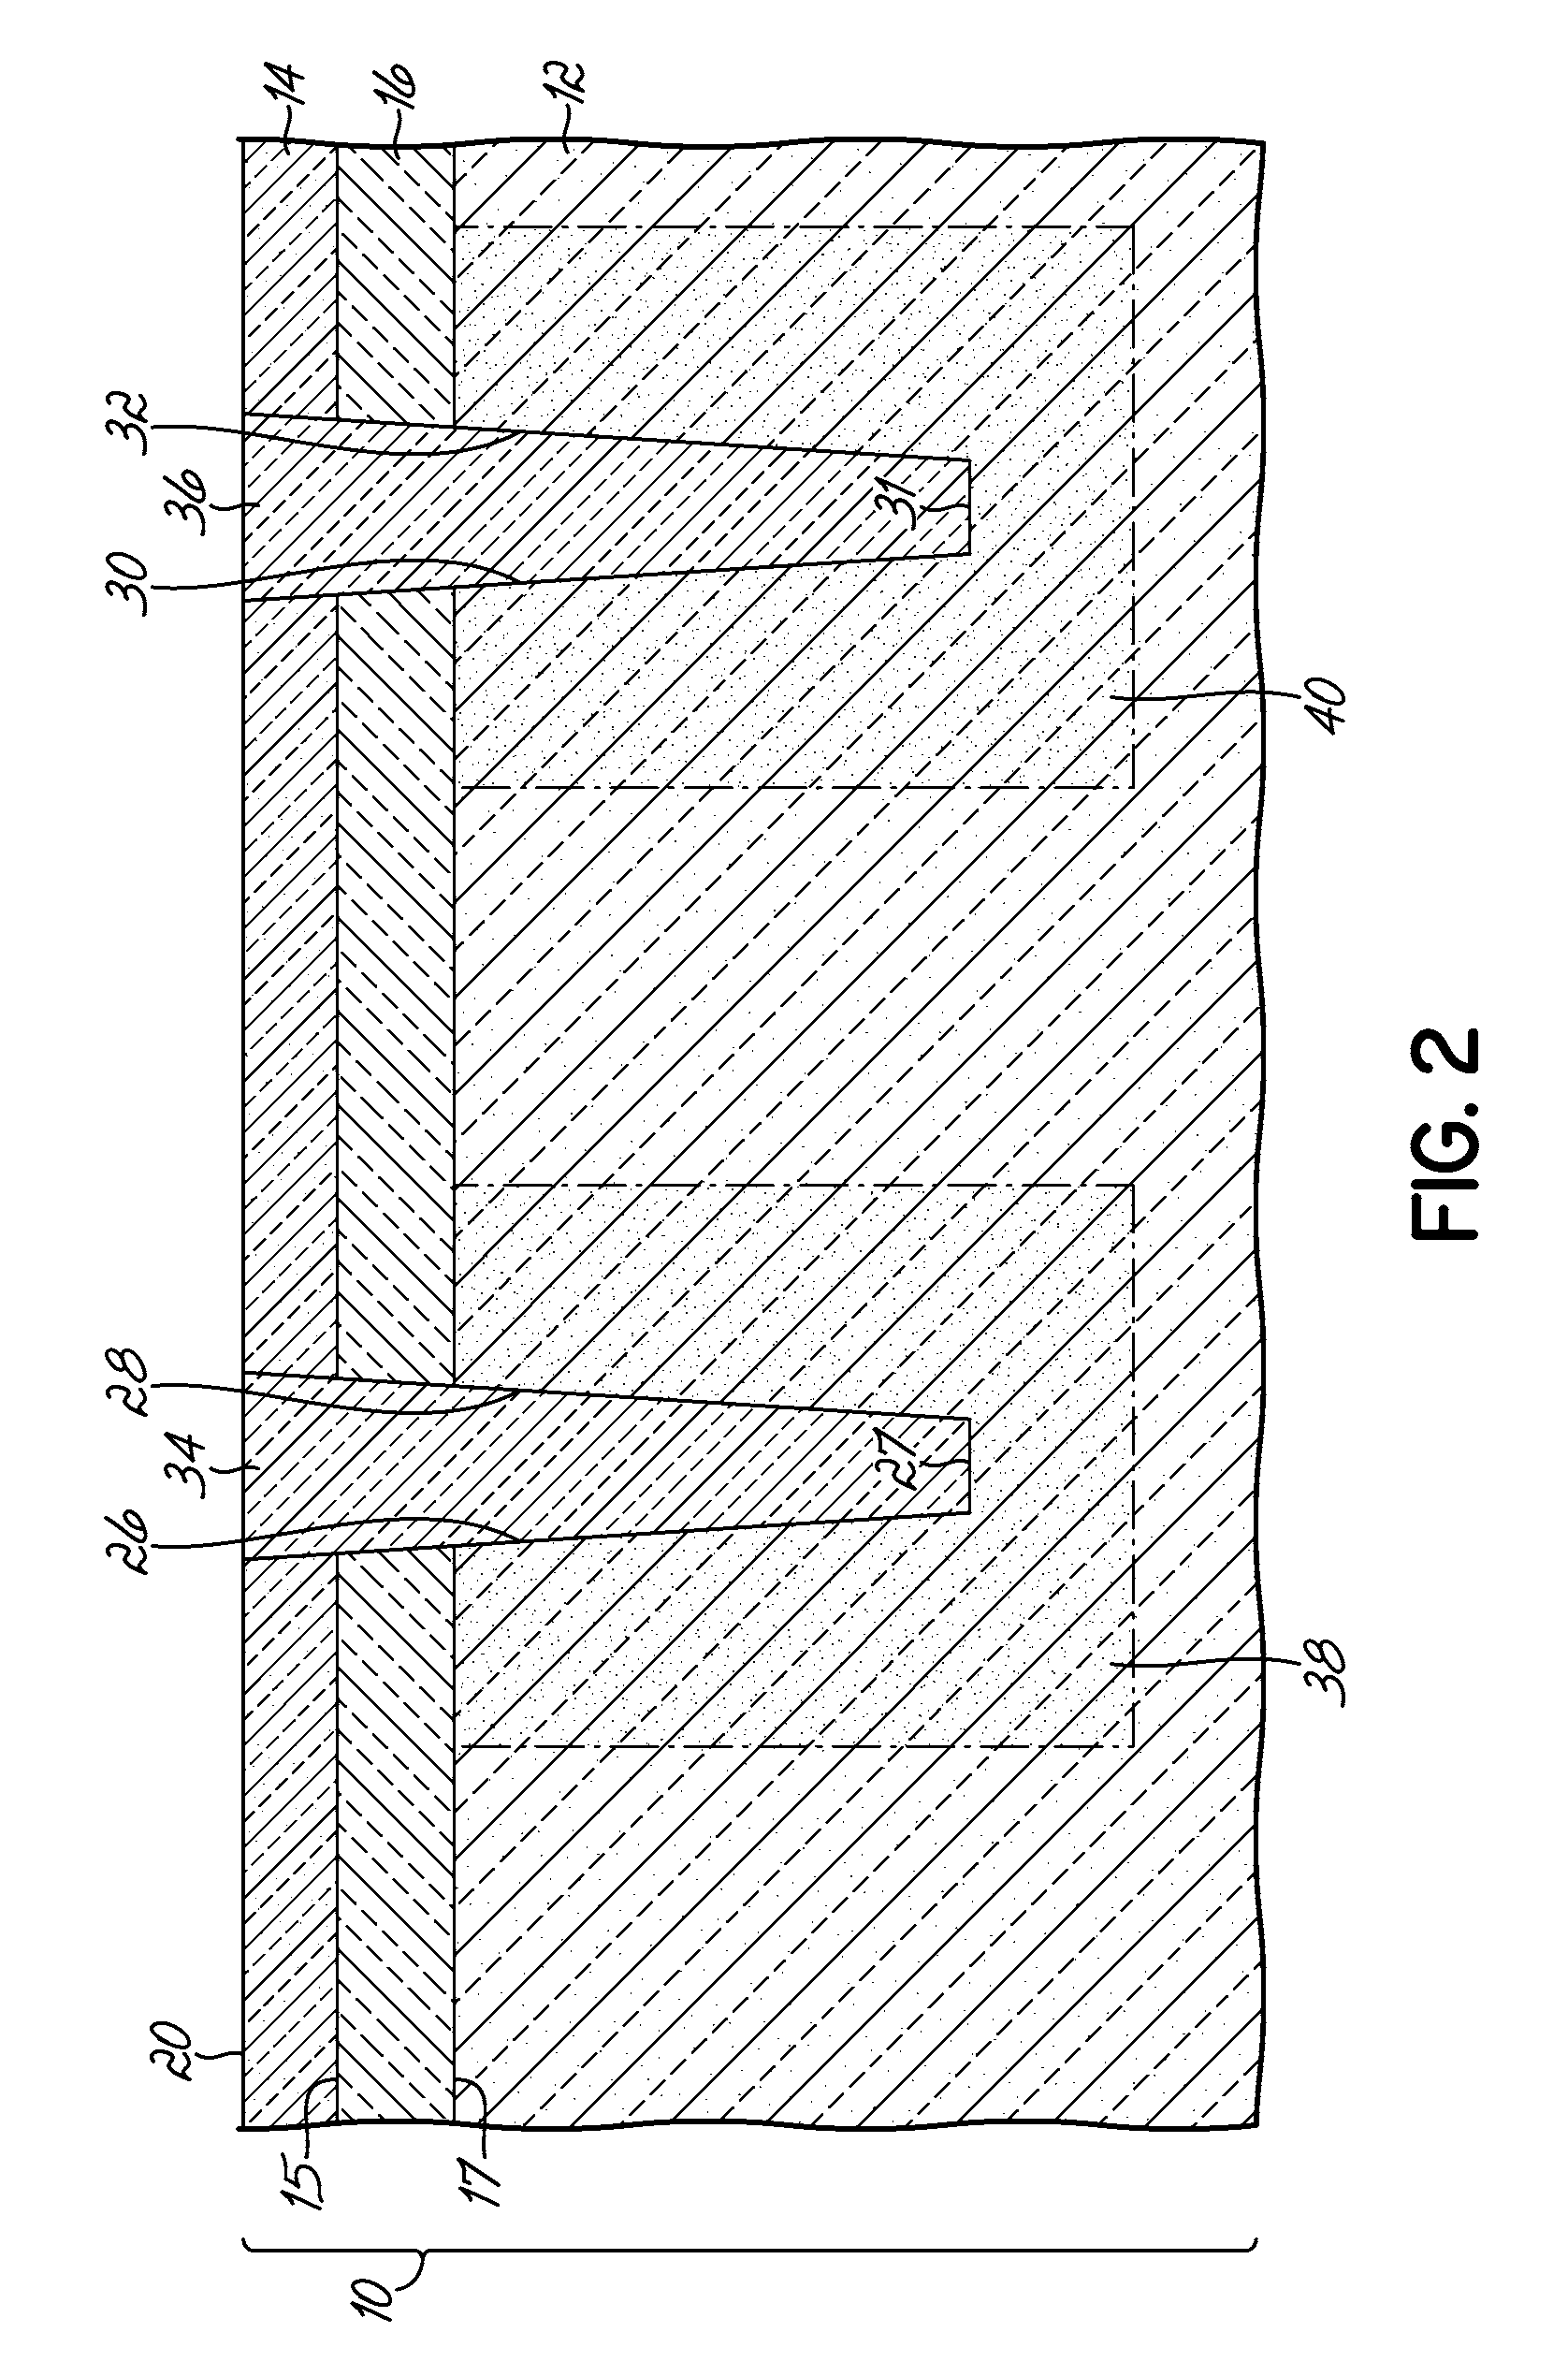 Trench generated device structures and design structures for radiofrequency and BiCMOS integrated circuits